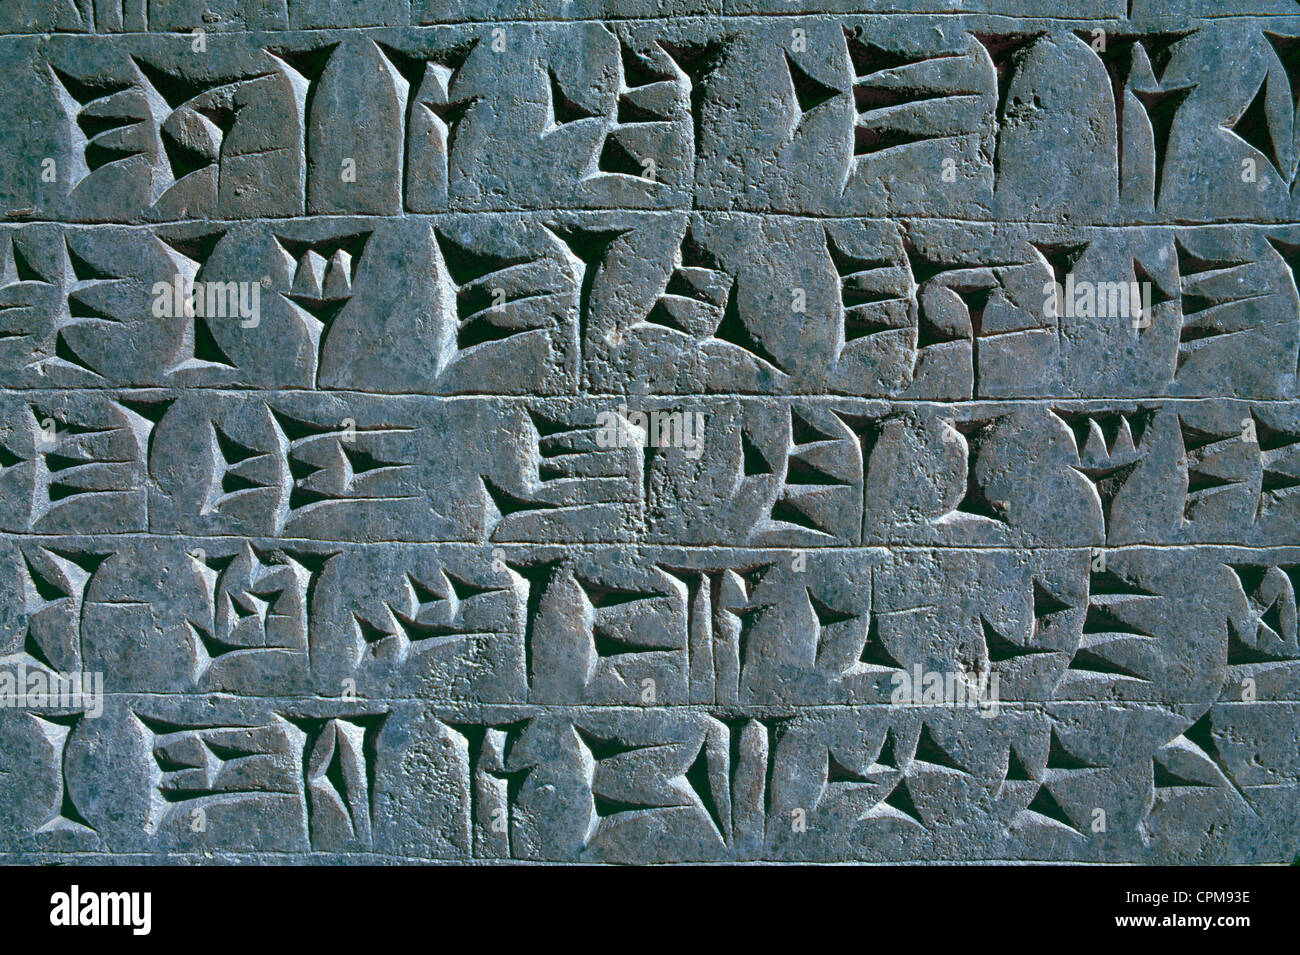 Cuneiform writing at Nimrud - Mosul - where a cache of more than 1000 gold jewelry and precious stones were found in 1988 Stock Photo